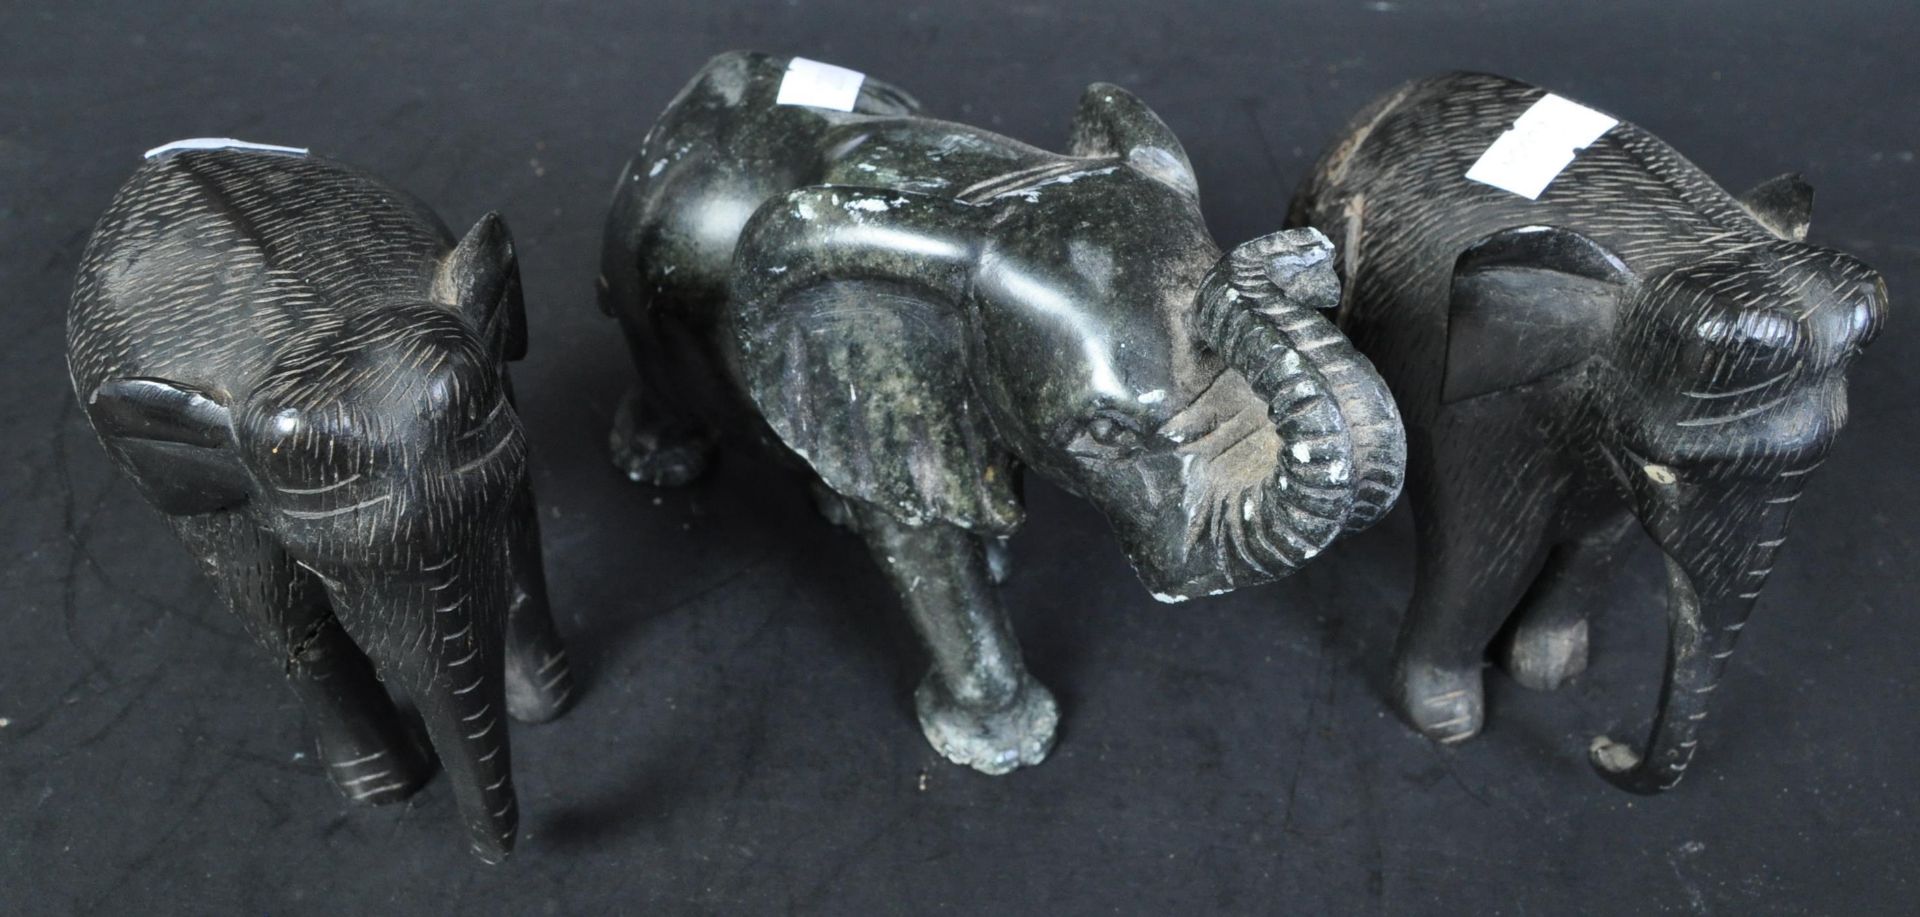 COLLECTION OF FIVE WOODEN ELEPHANT STATUES - Image 4 of 5